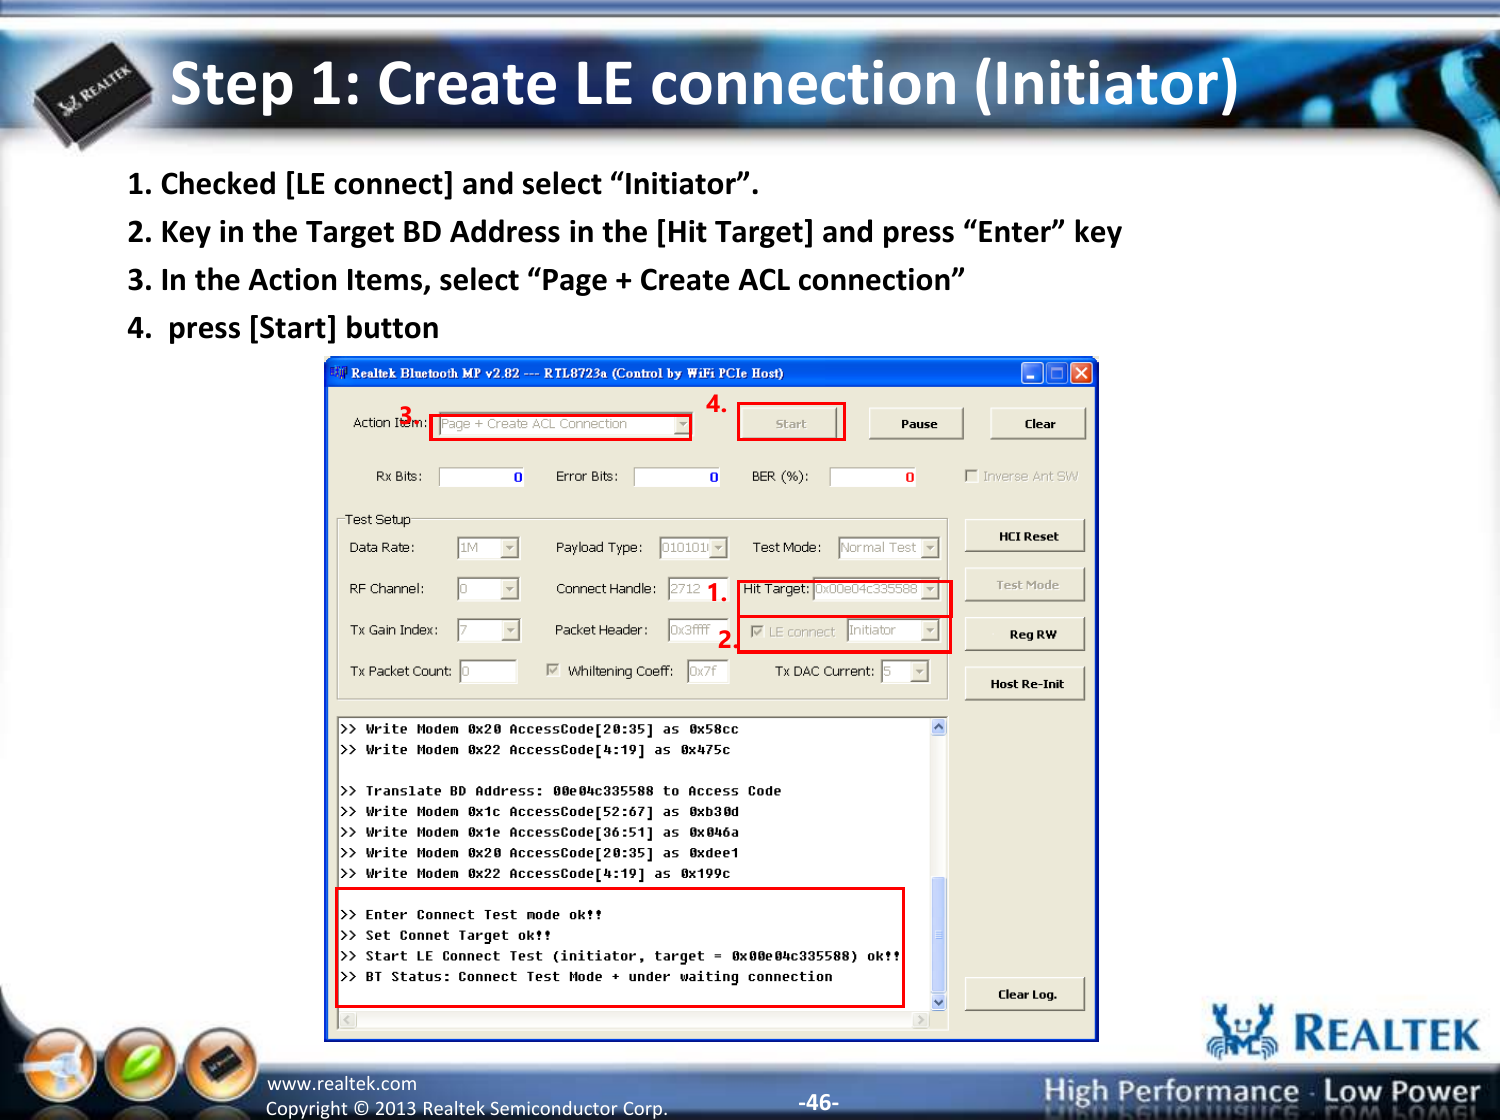 -46- Copyright ©  2013 Realtek Semiconductor Corp. www.realtek.com Step 1: Create LE connection (Initiator) 1. Checked [LE connect] and select “Initiator”. 2. Key in the Target BD Address in the [Hit Target] and press “Enter” key 3. In the Action Items, select “Page + Create ACL connection”  4.  press [Start] button 1. 3. 4. 2. 